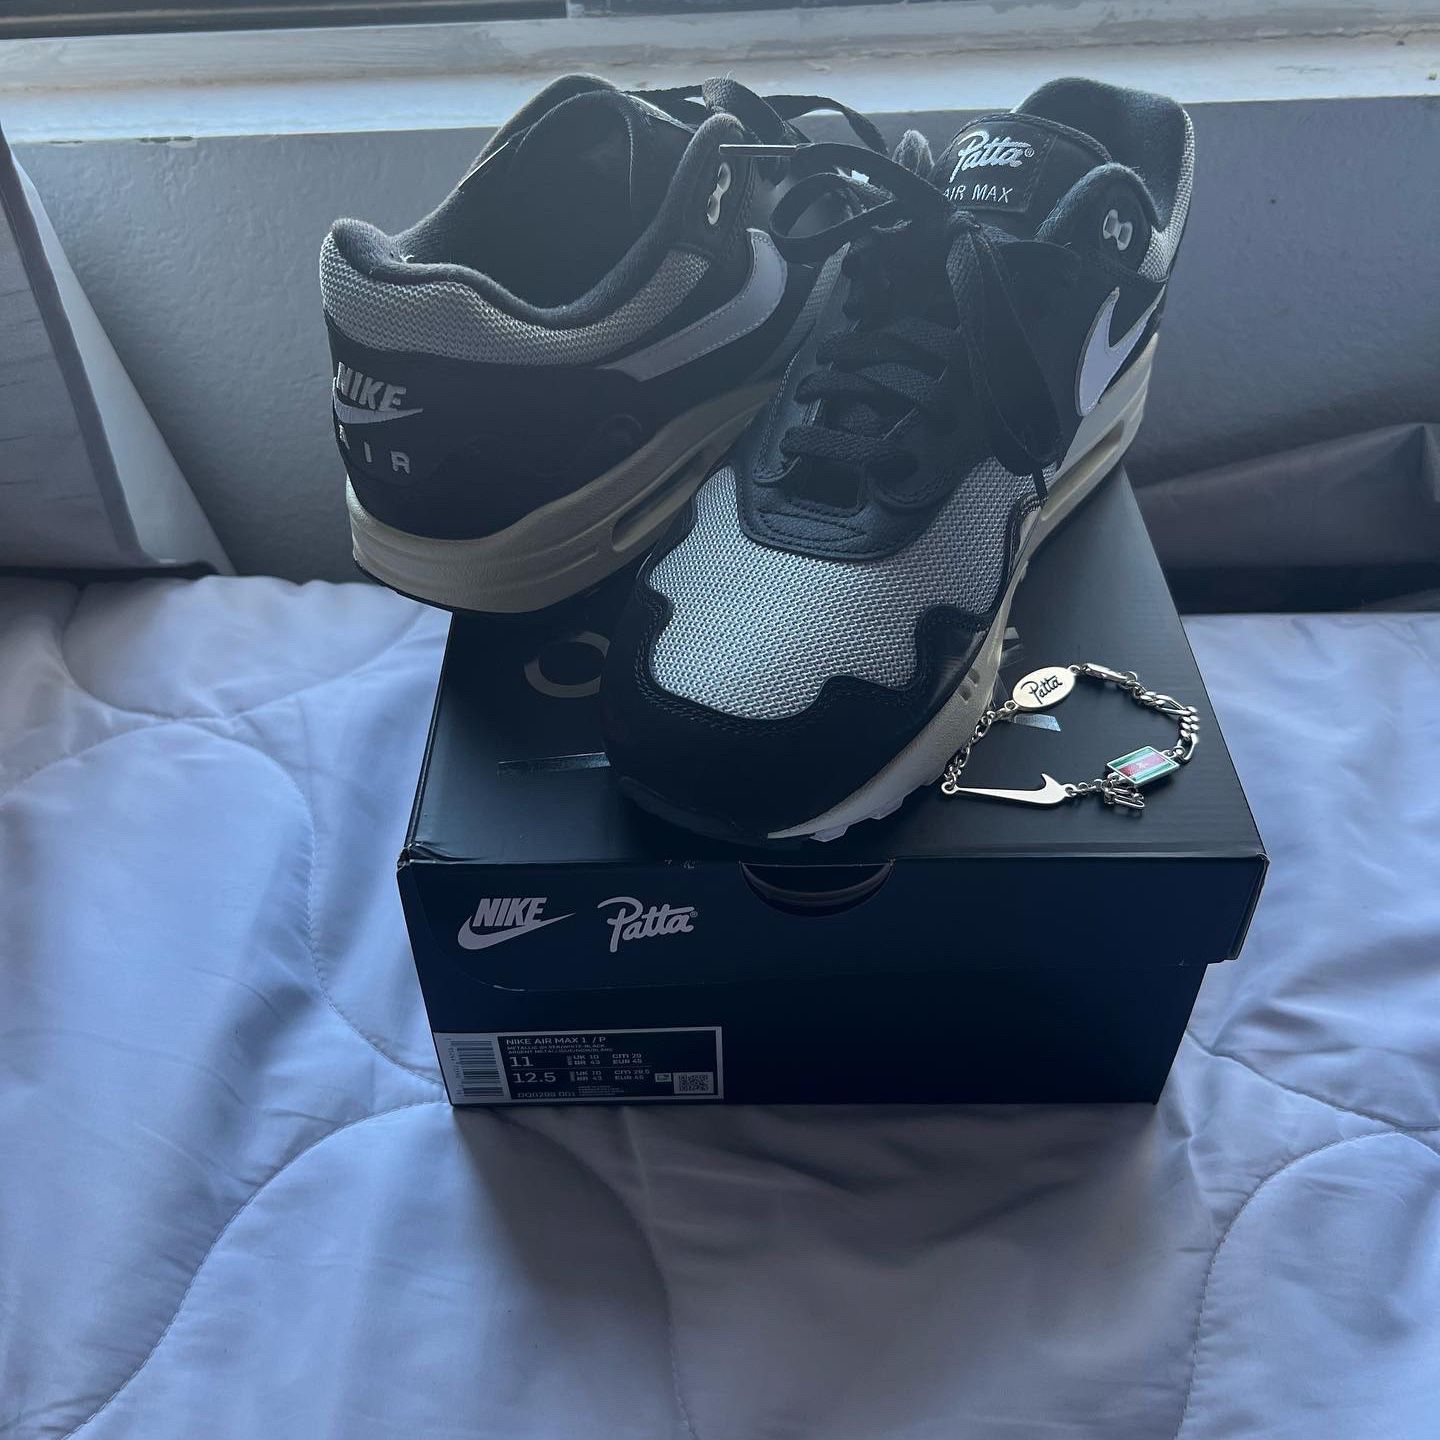 Nike Air Max 90 for Sale in Wynnewood, PA - OfferUp